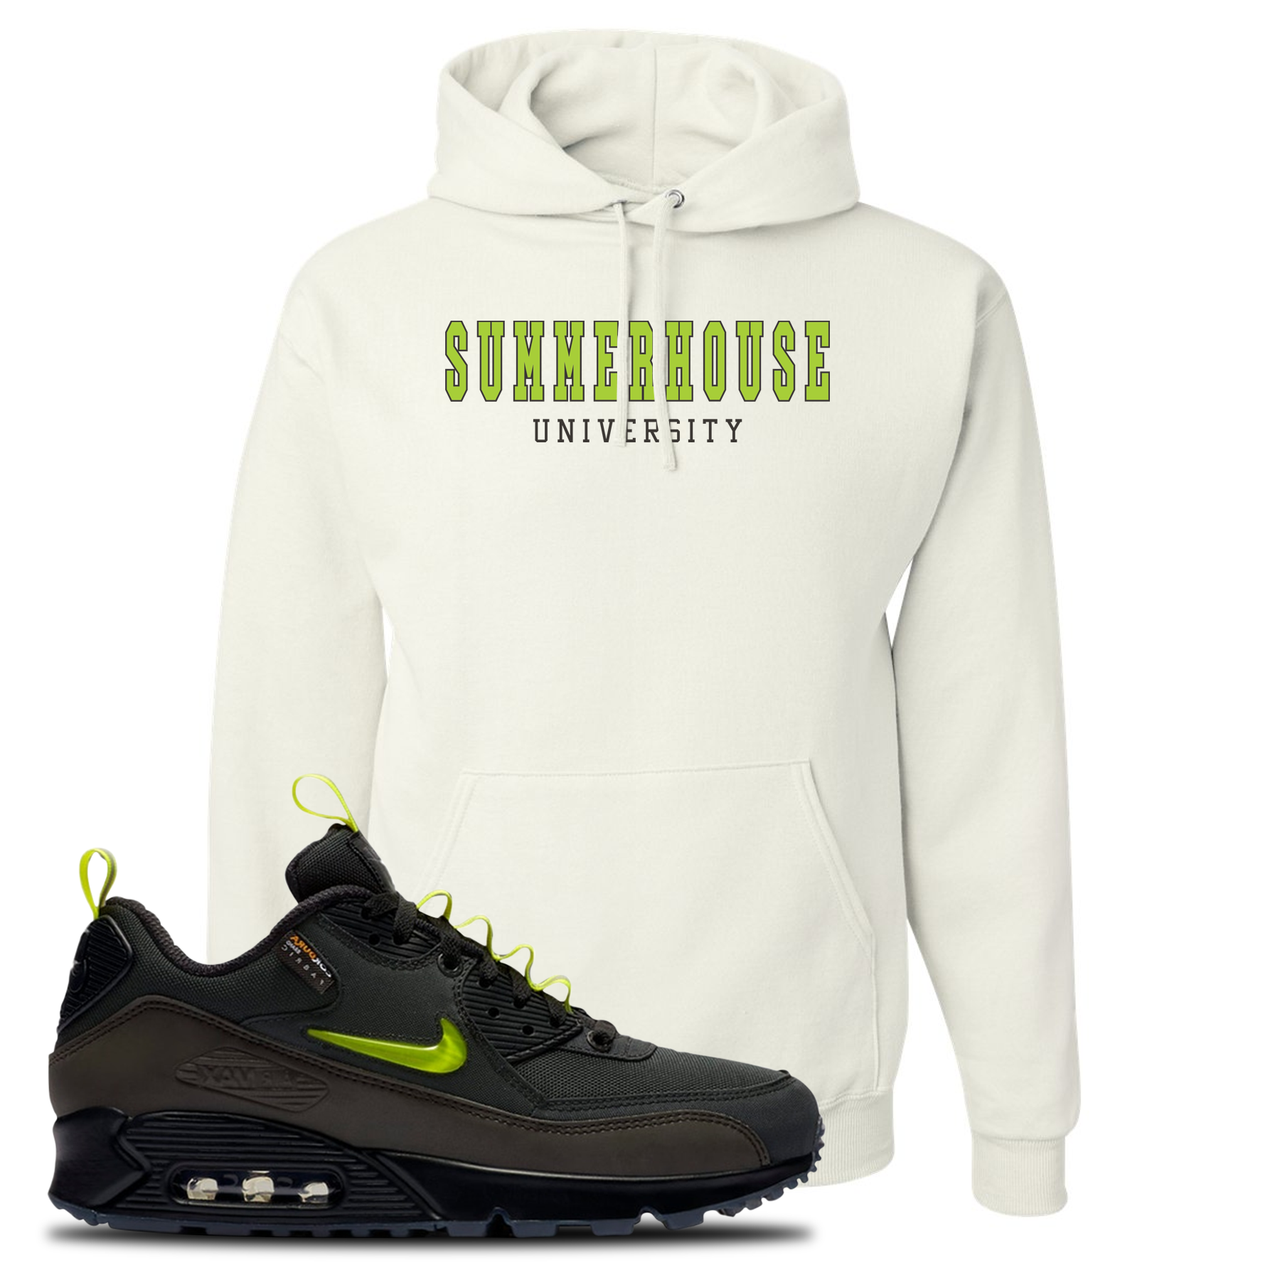 The Basement X Air Max 90 Manchester Summerhouse University White Sneaker Hook Up Pullover Hoodie